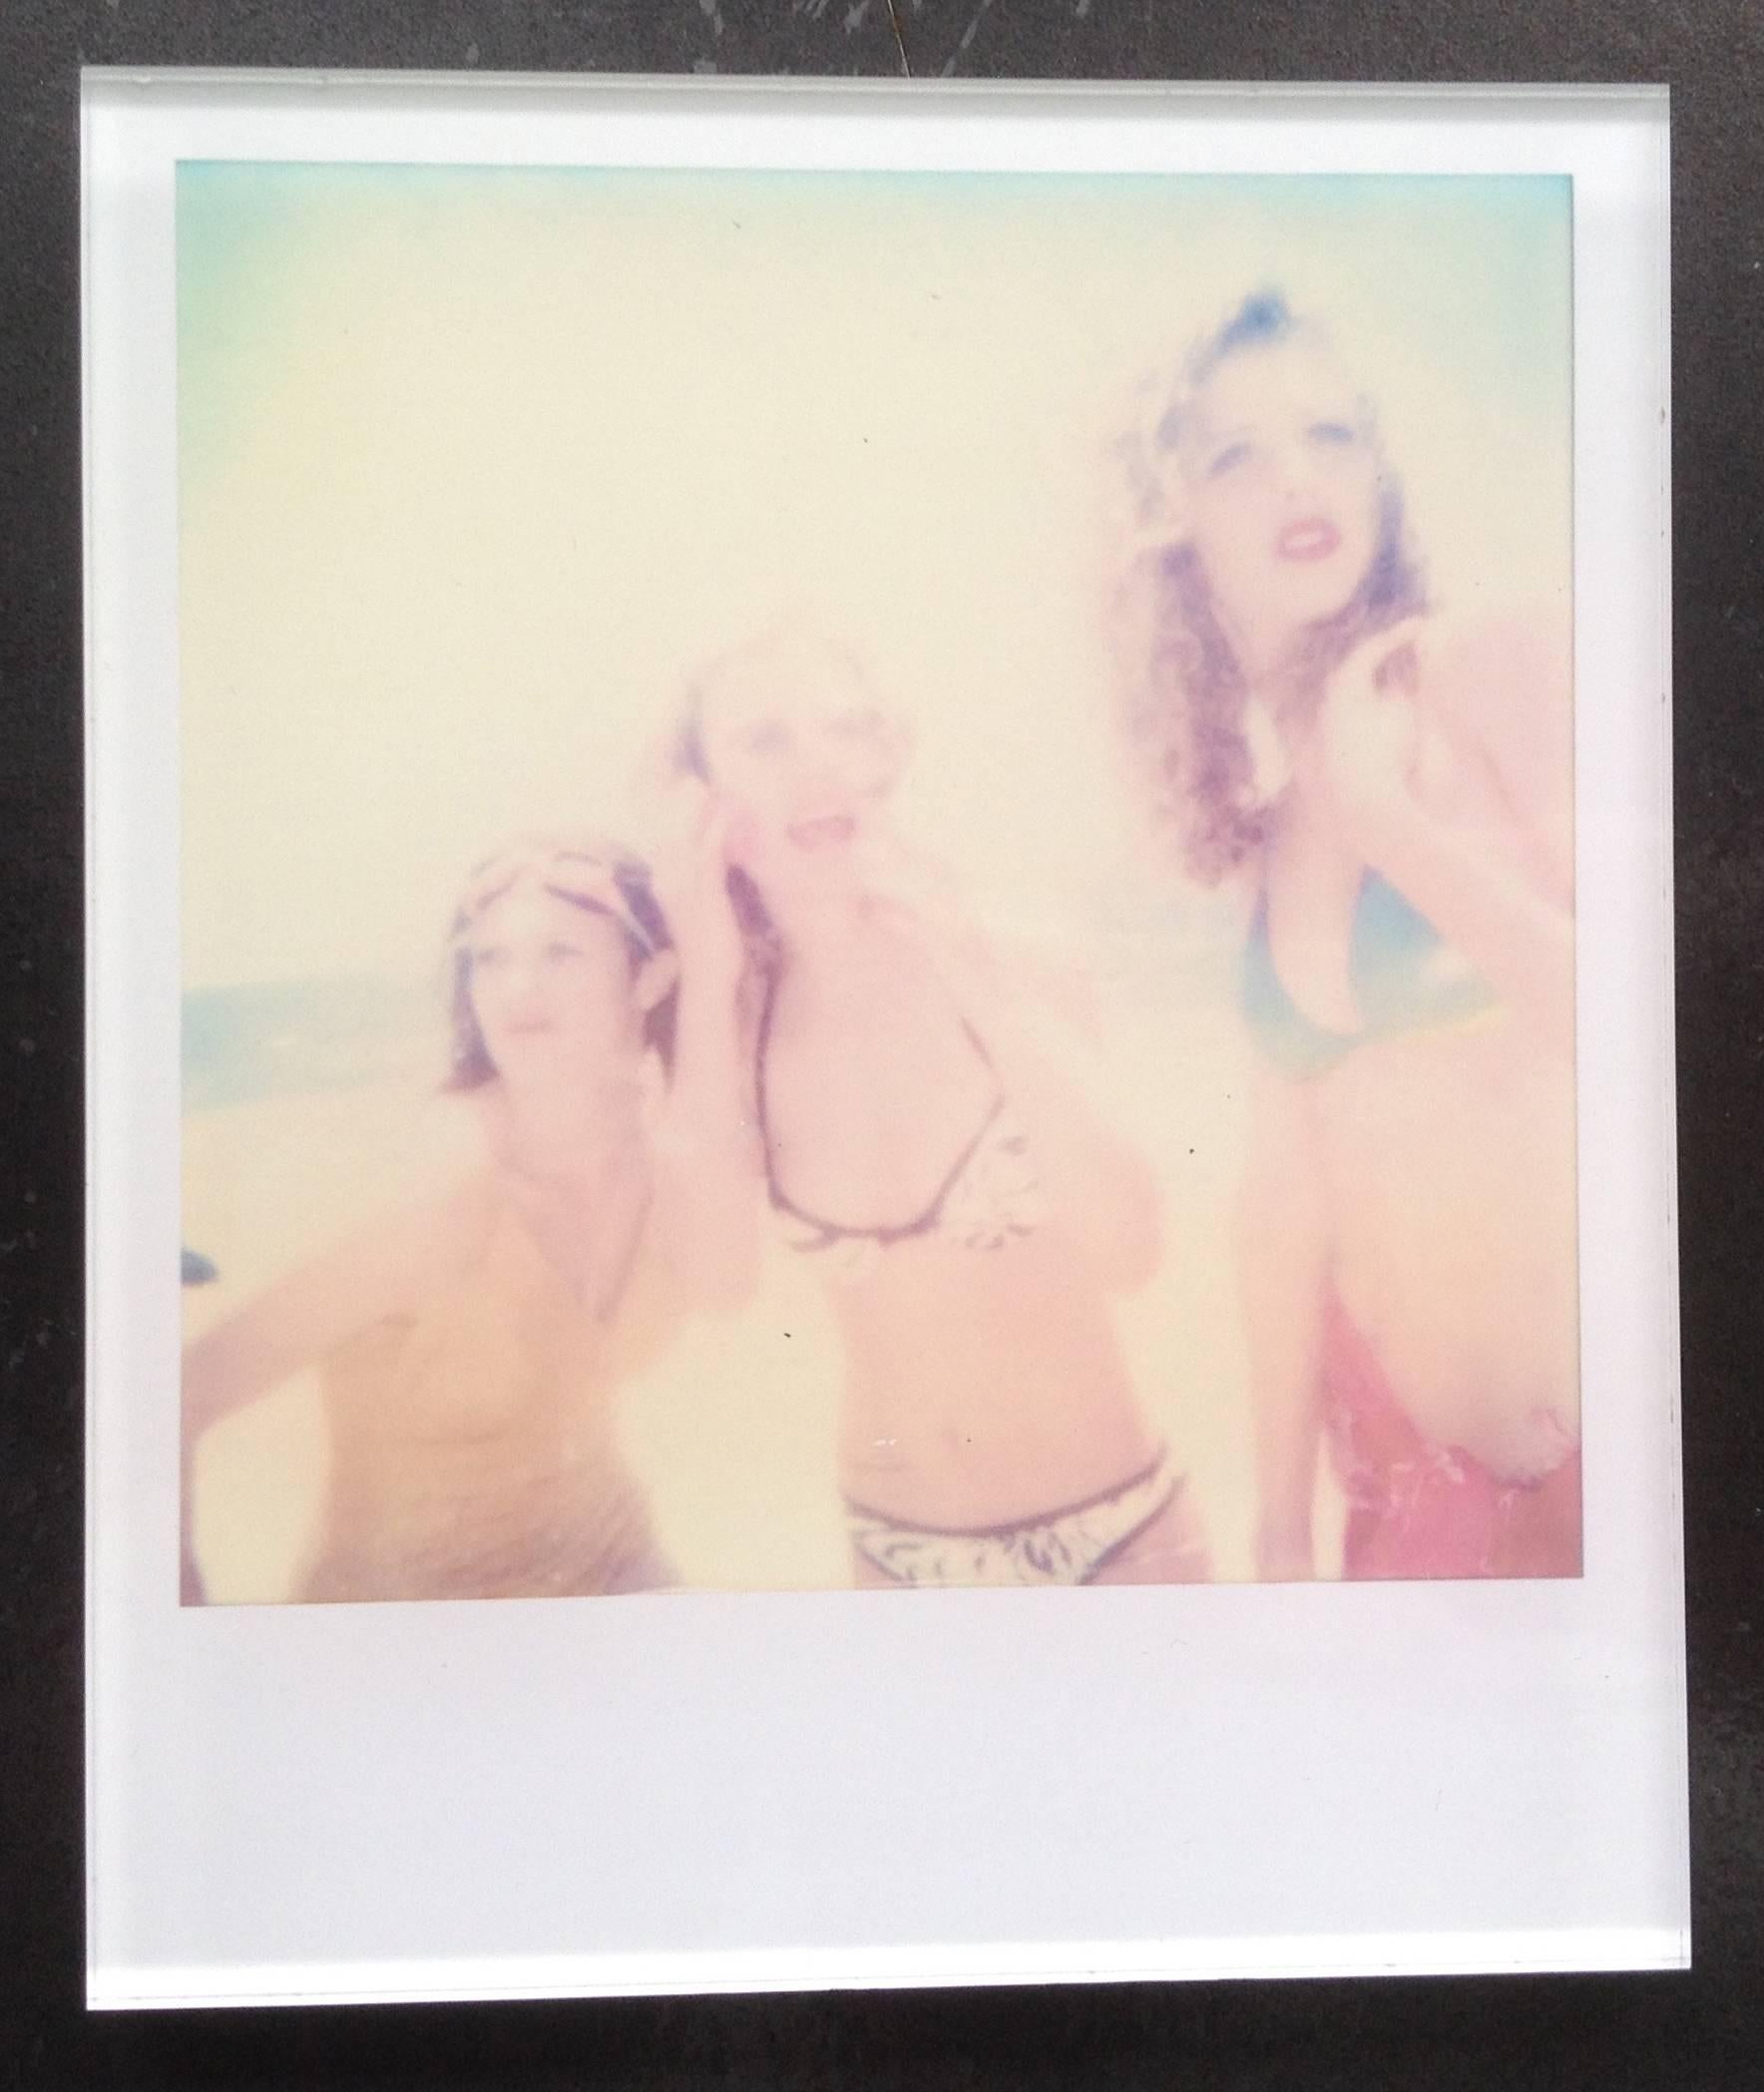 Stefanie Schneider's Minis
'Untitled #2' (Beachshoot) featuring Radha Mitchell, 2005
signed and signature brand on verso
Lambda digital Color Photographs based on a Polaroid

Polaroid sized open Editions 1999-2013
10.7 x 8.8cm (Image